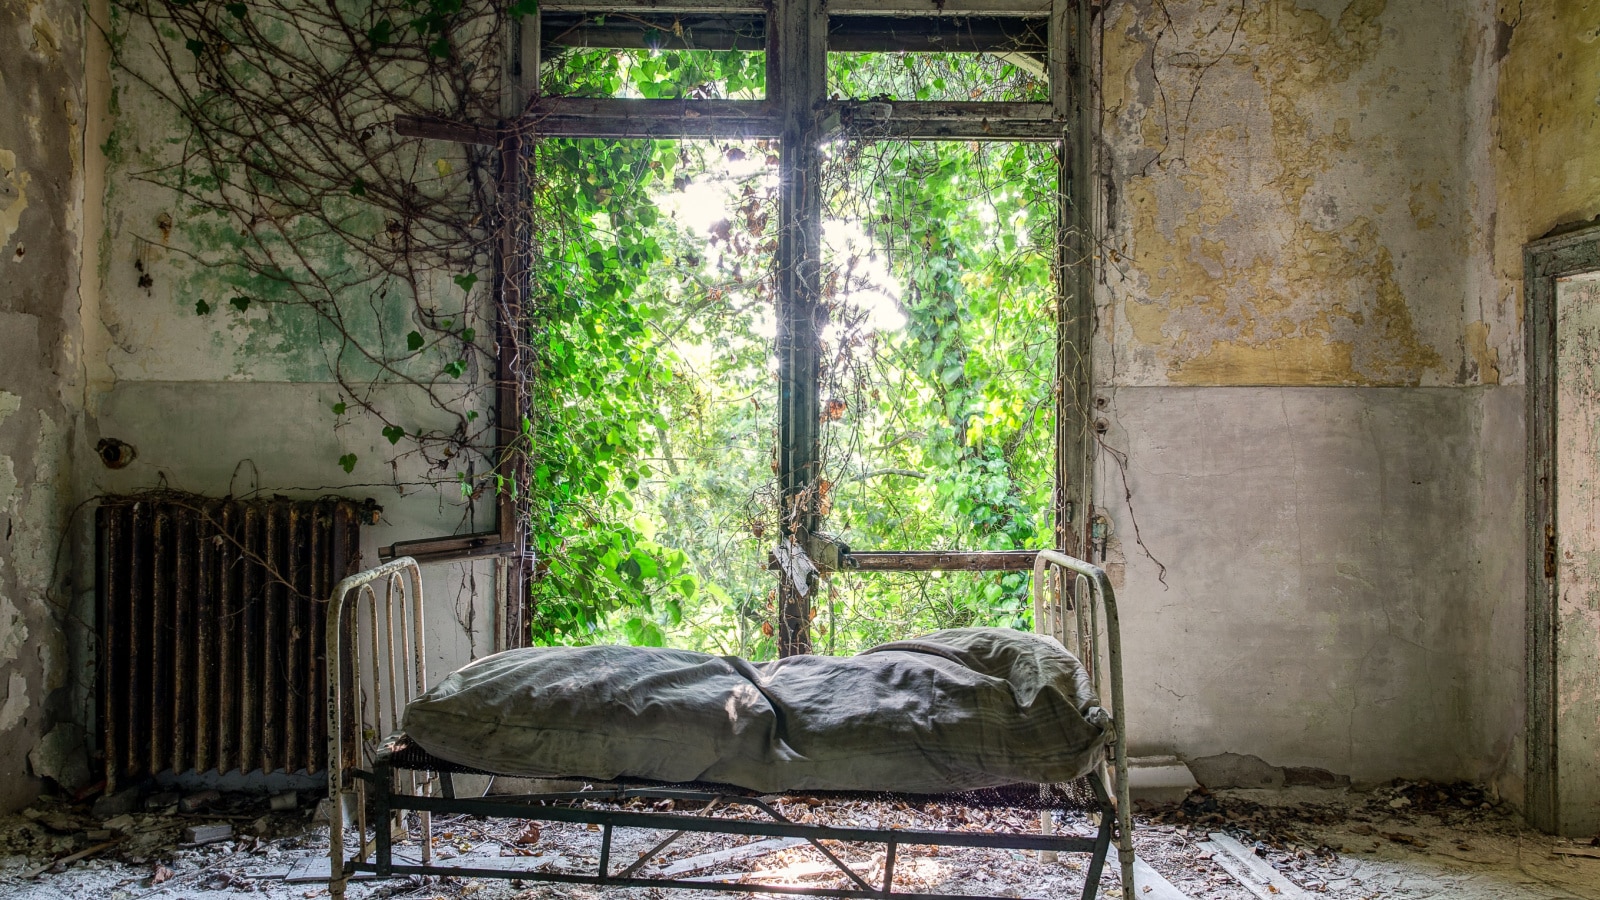 A ruined Hospital lies crumbling on the abandoned and supposedly haunted Poveglia Island in Italy.